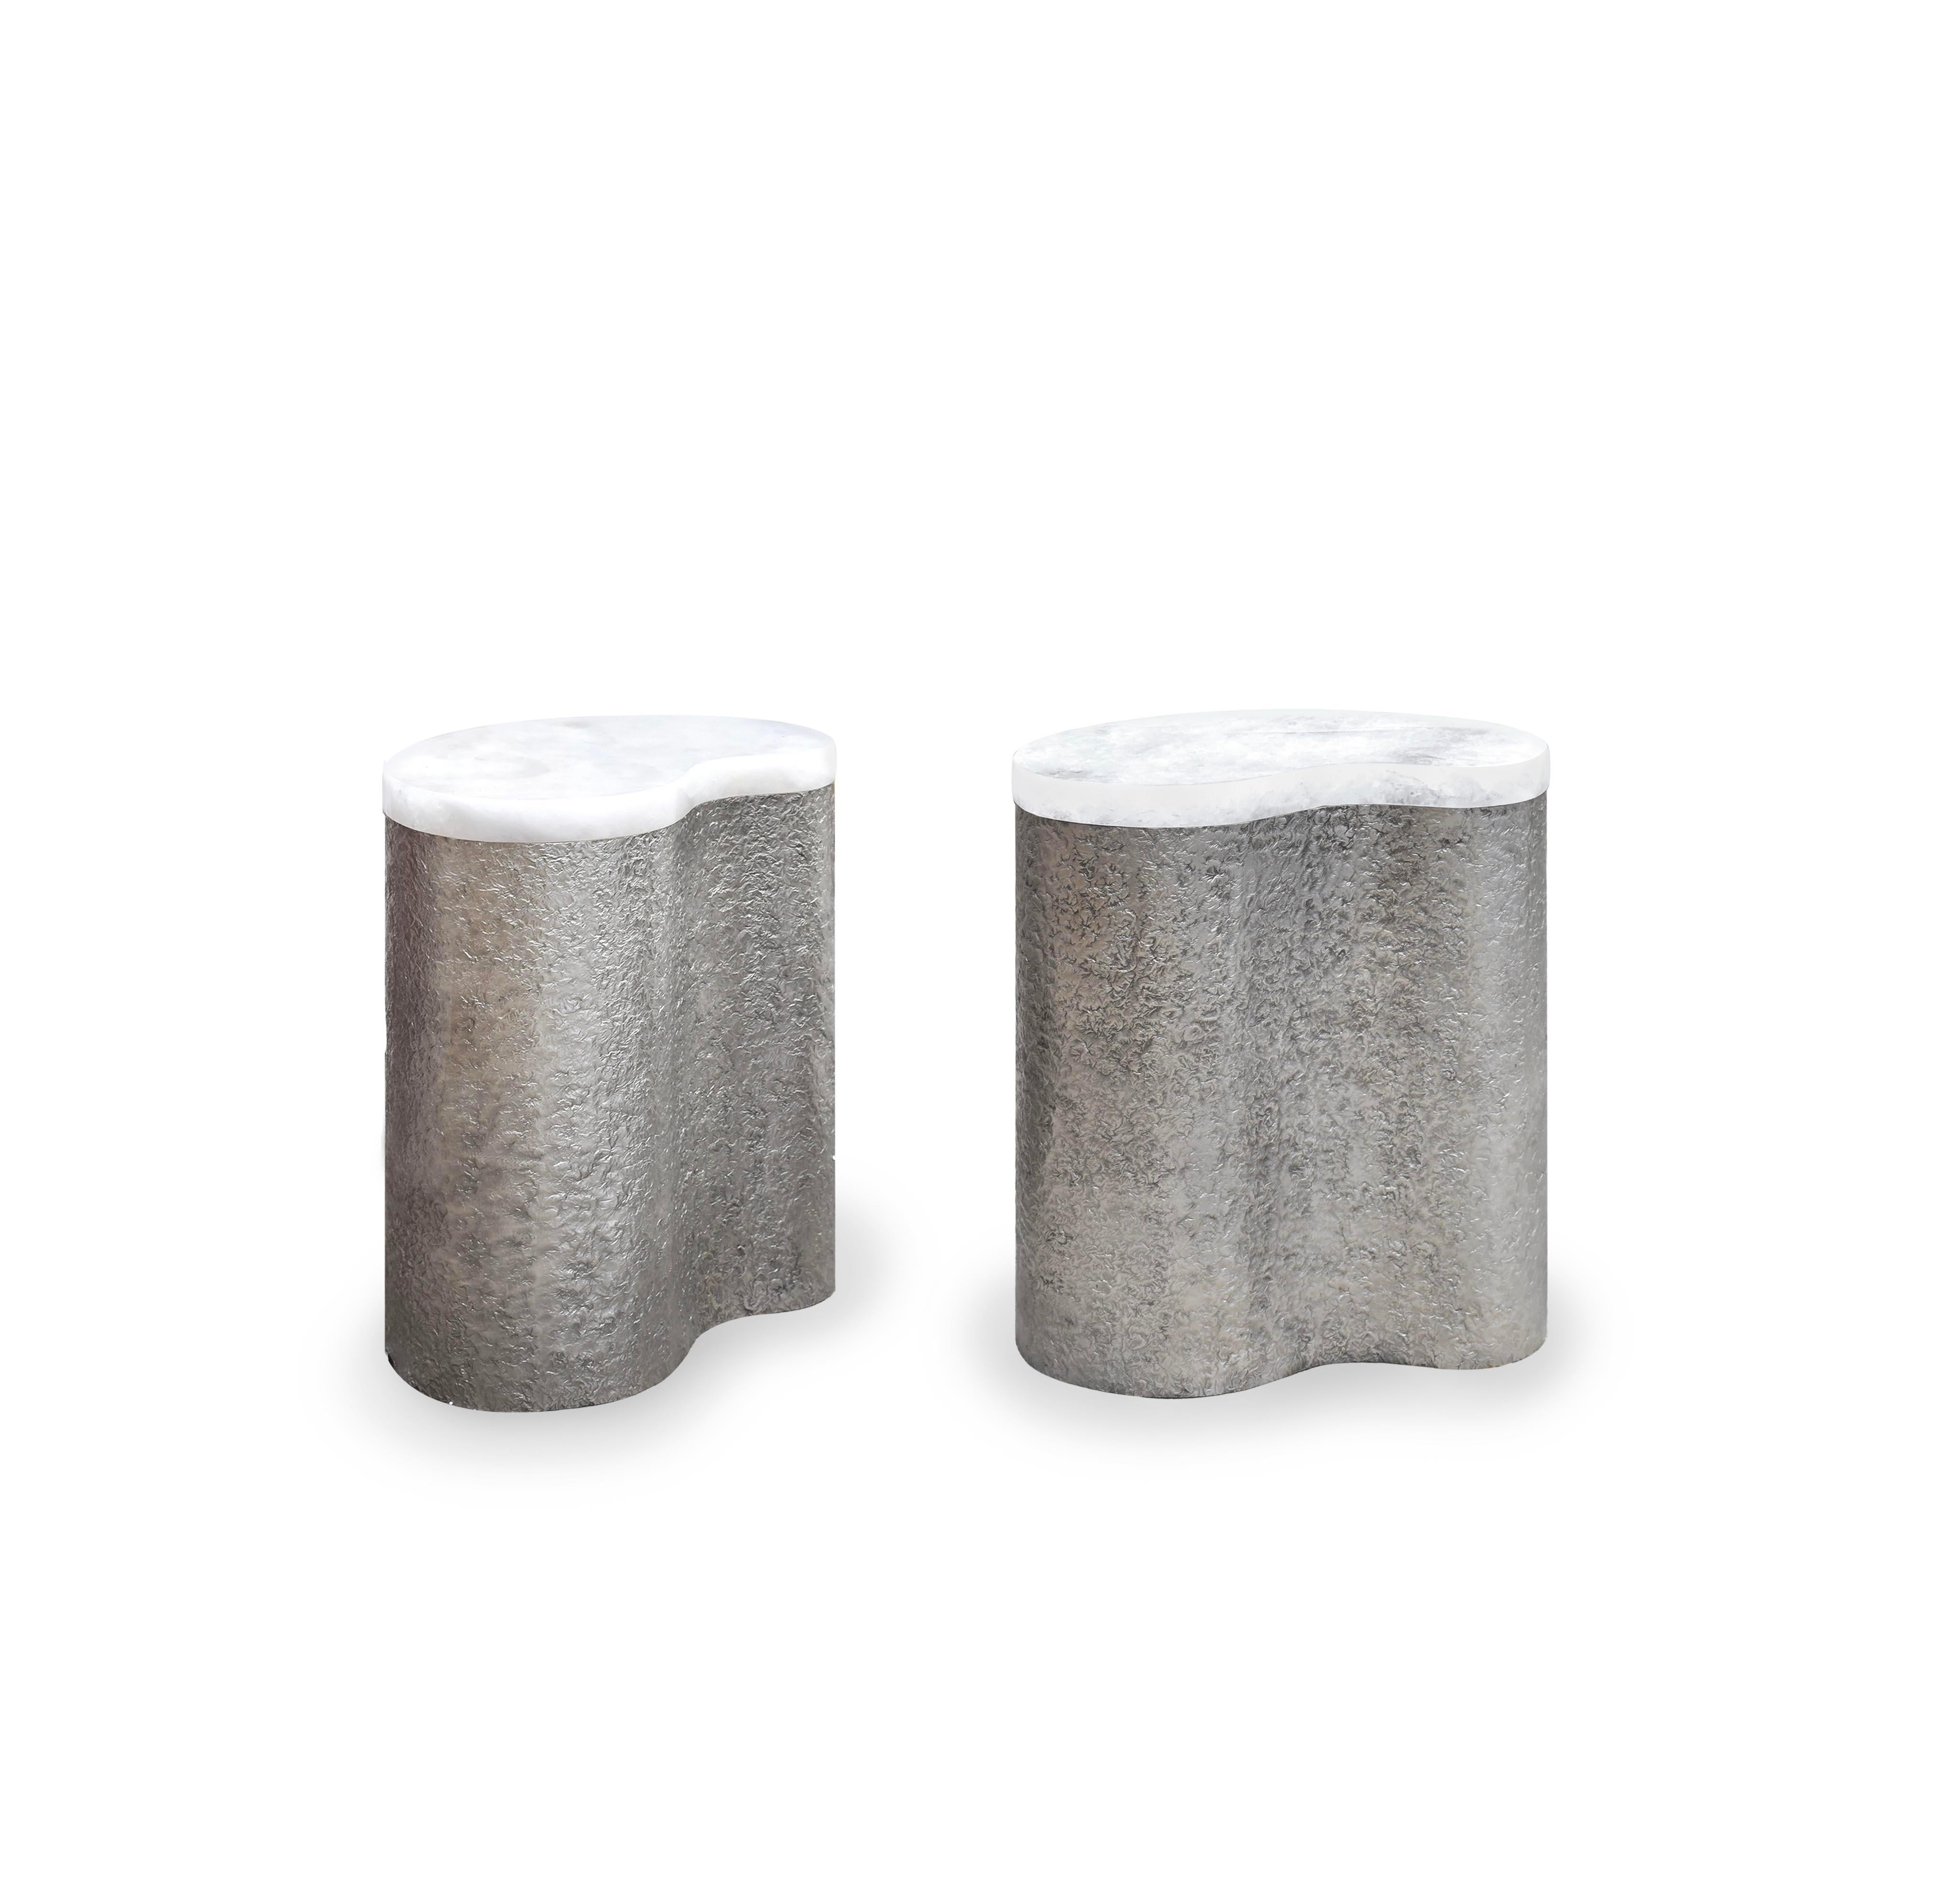 Pair of hammered matte nickel finish side tables with rock crystal quartz tops, created by Phoenix Gallery NYC.
Custom size and metal finish upon request.